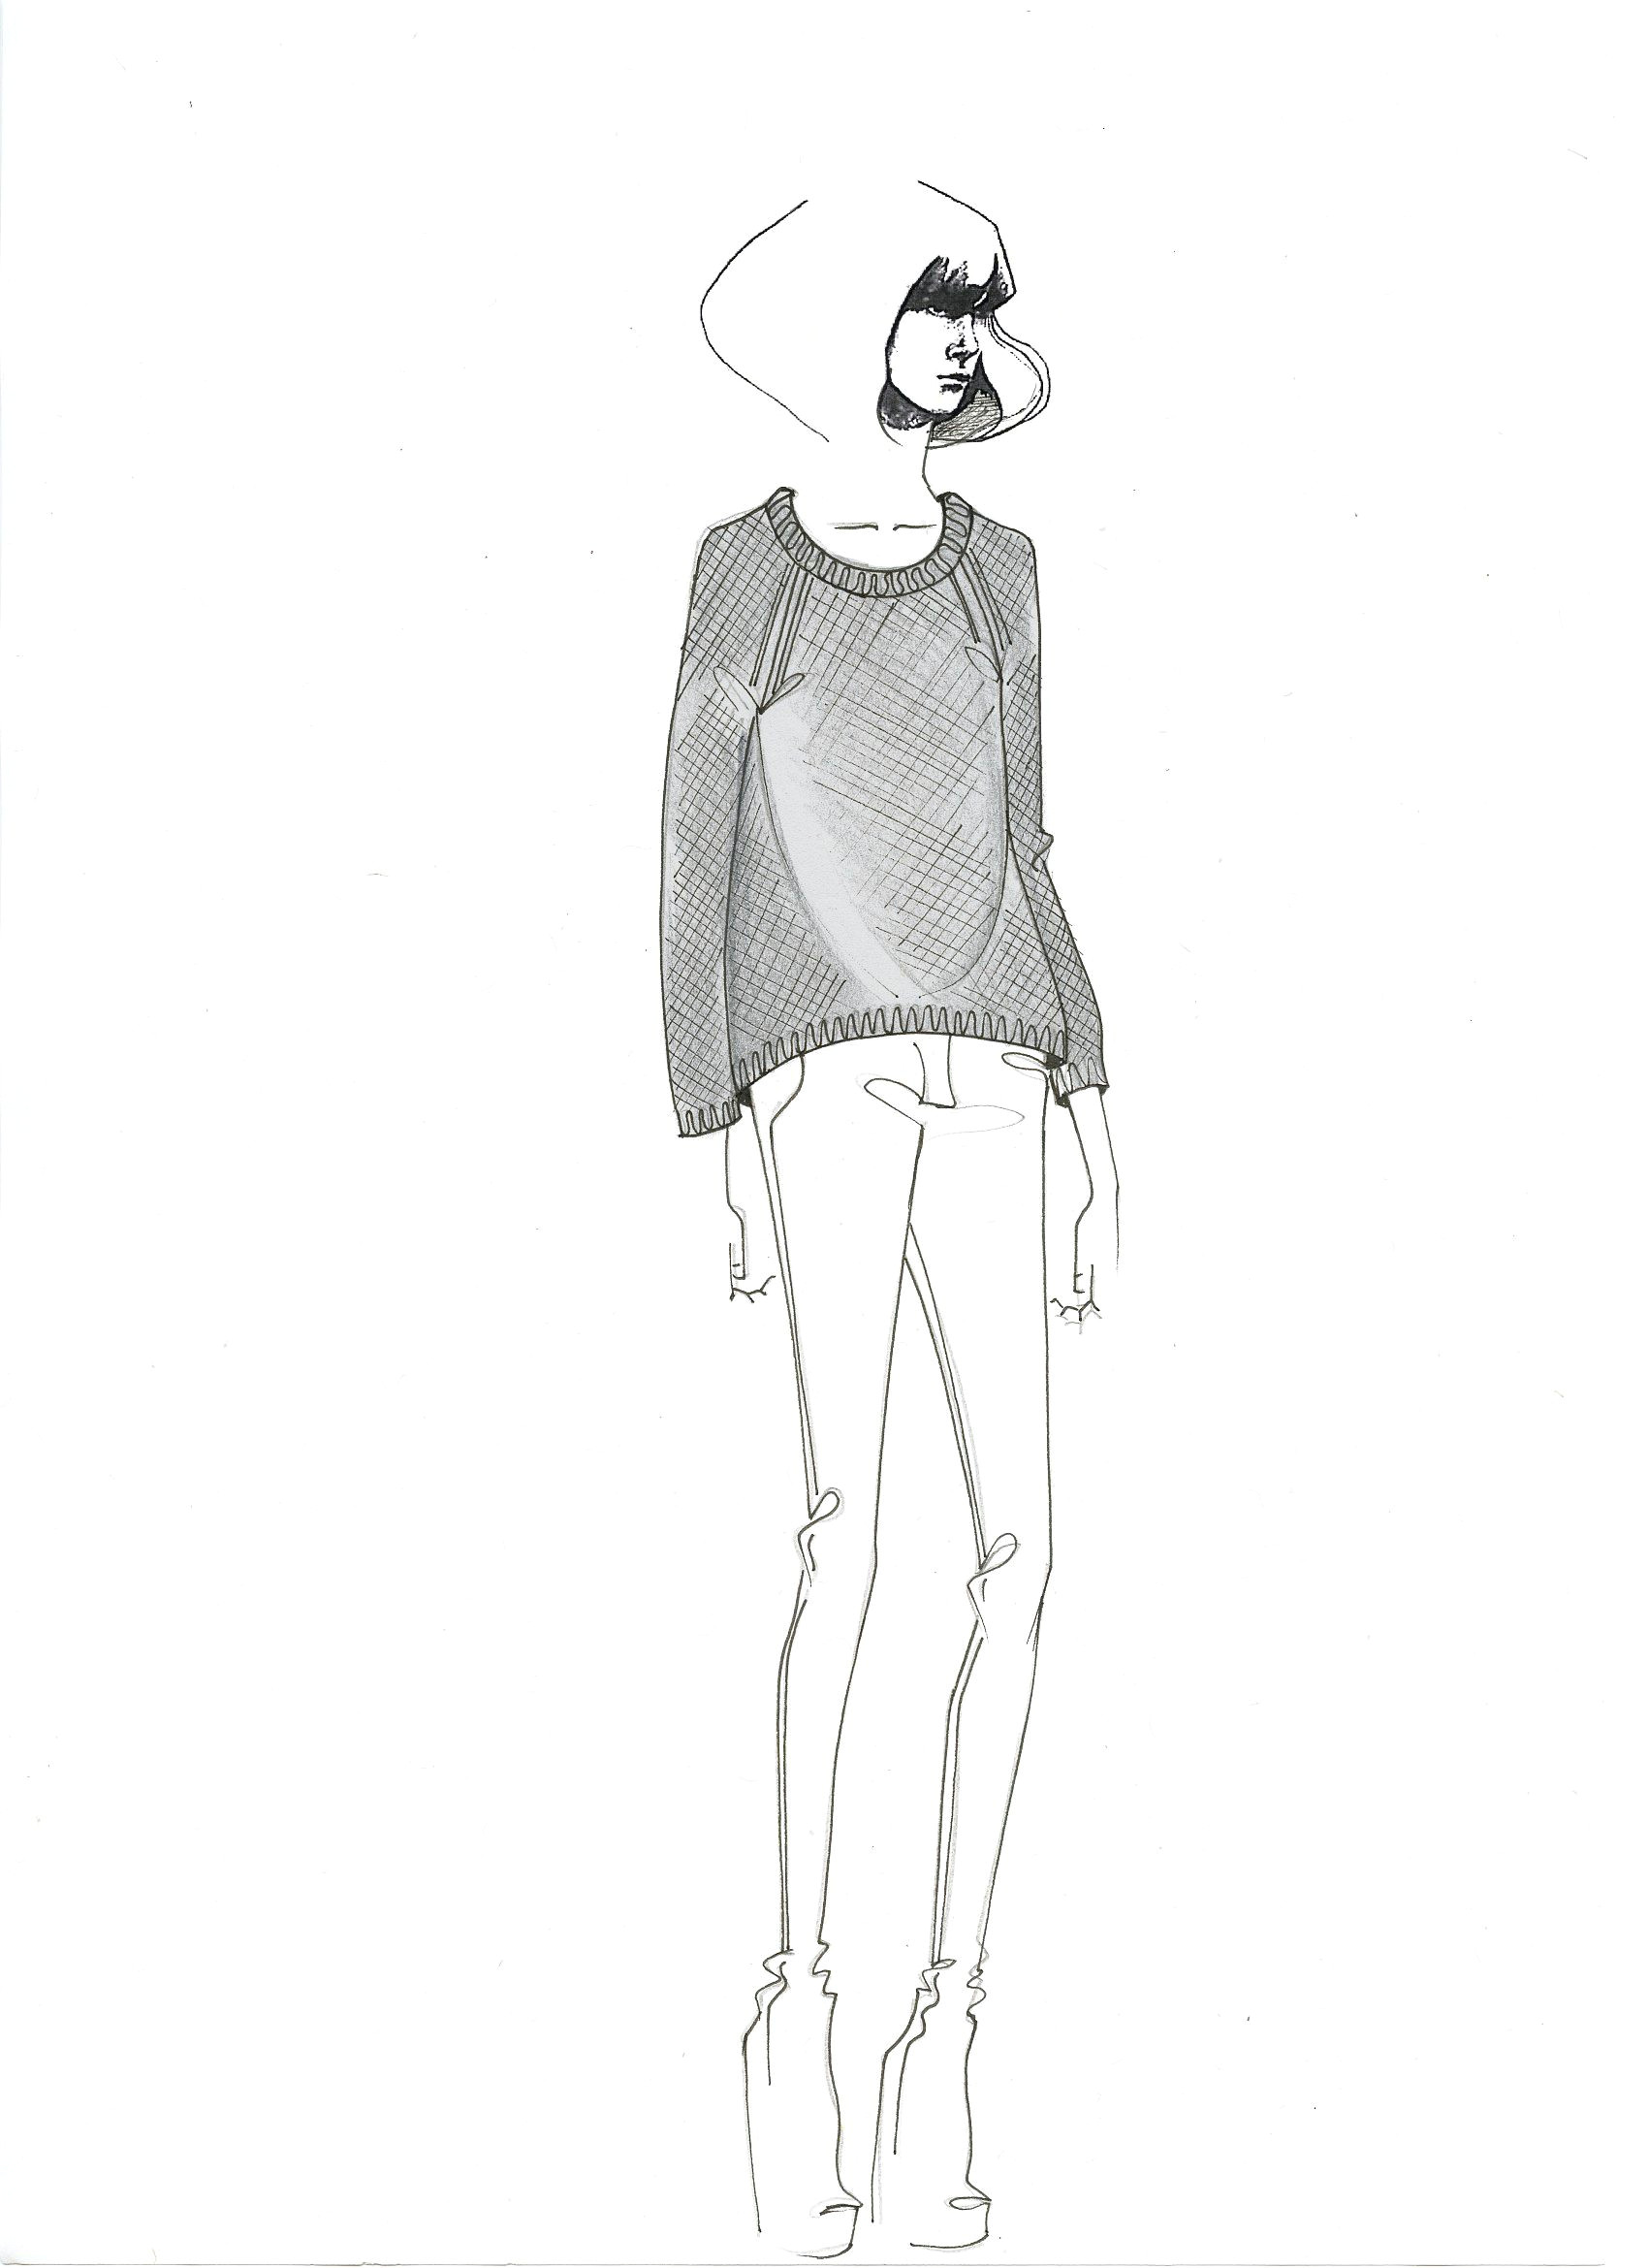 Drawing Ideas Stitch Steel Grey Florence Jumper In A Honeycomb Stitch with Poppers Down